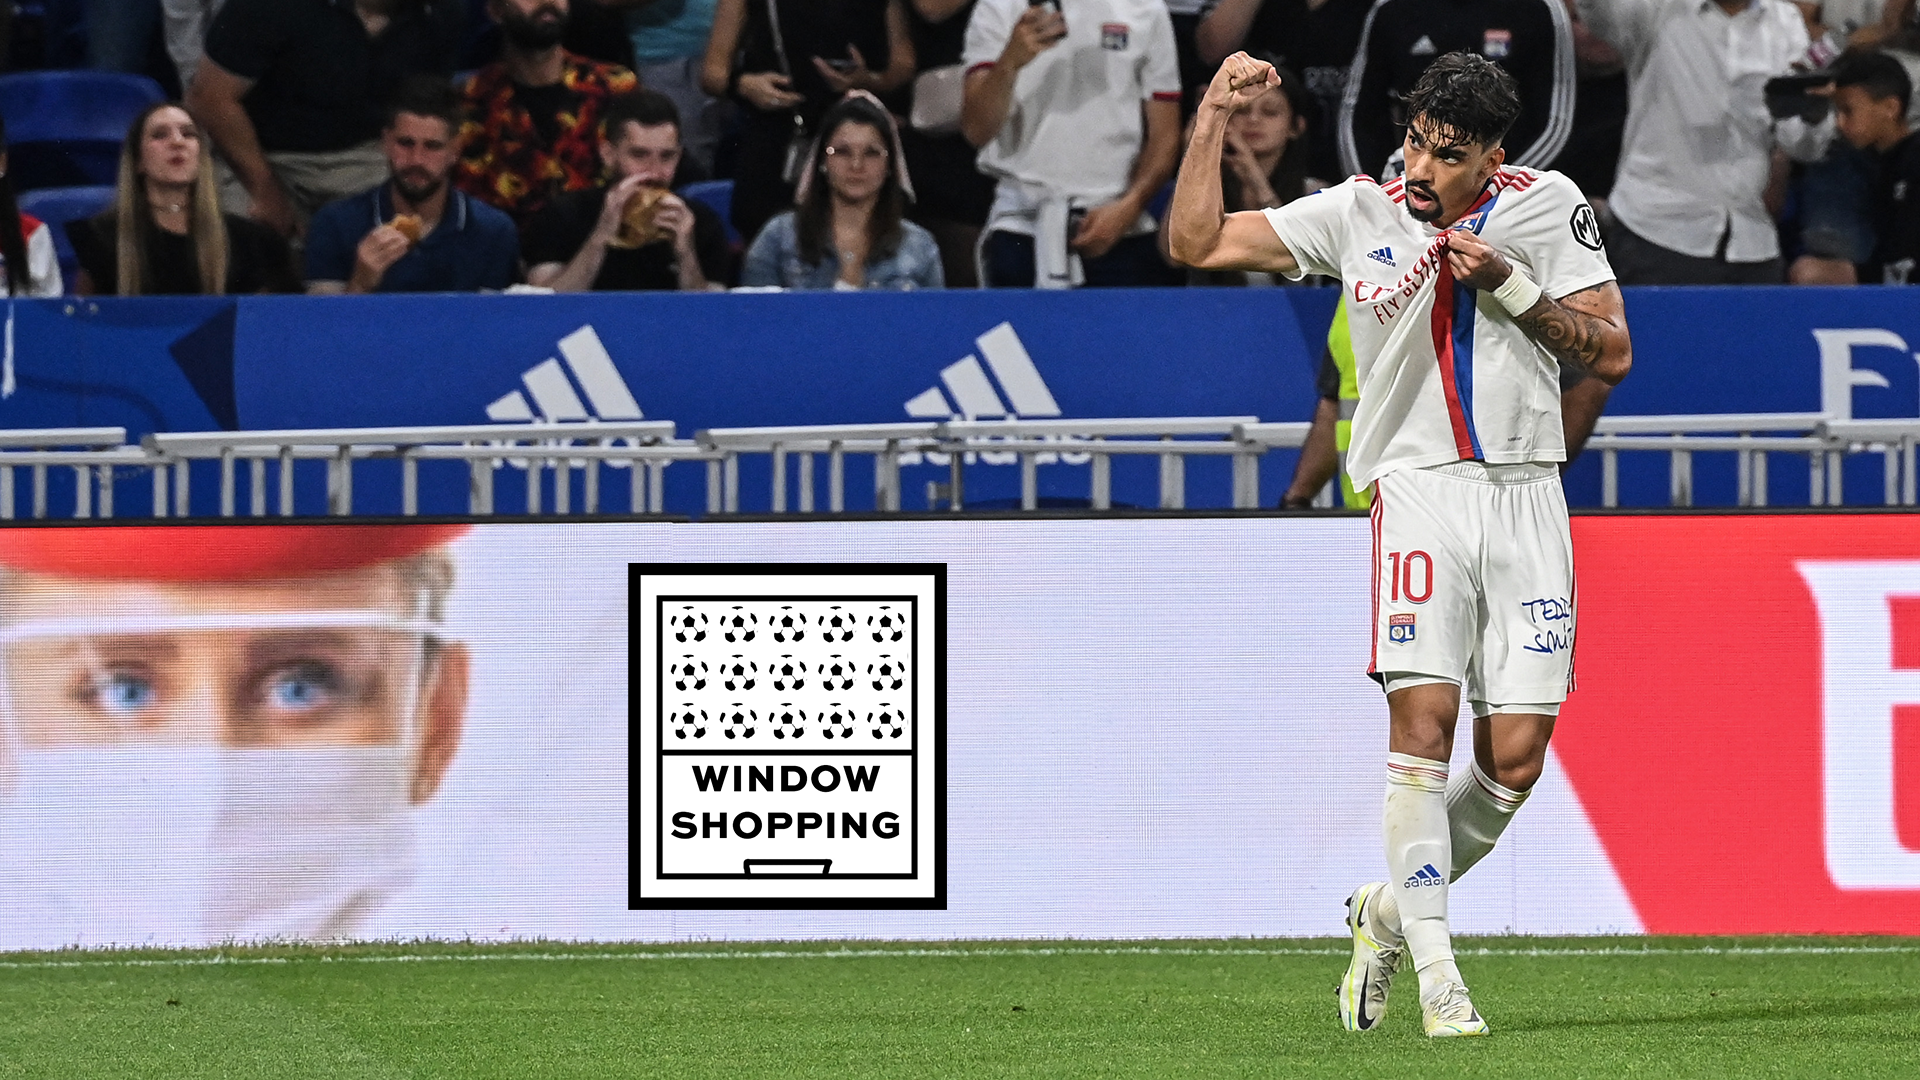 Lyons Brazilian midfielder Lucas Paqueta celebrates during the French L1 football match between Olympique Lyonnais (OL) and FC Nantes at The Groupama Stadium in Decines-Charpieu, central-eastern France on May 14, 2022.